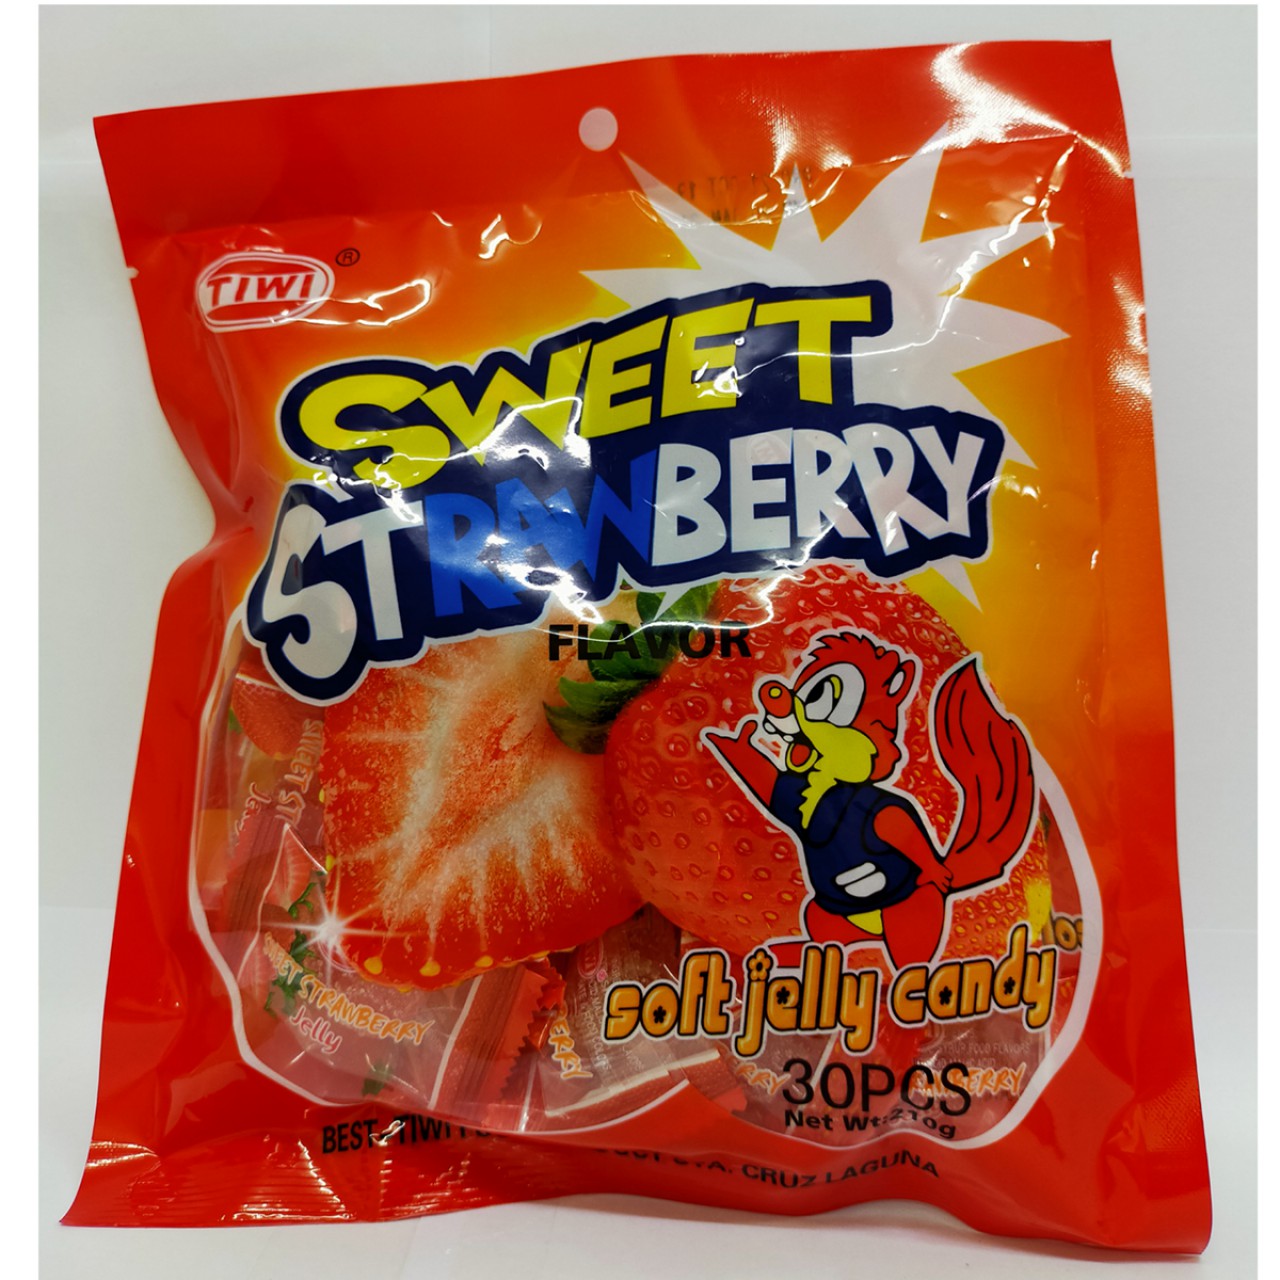 TIWI SWEET STRAWBERRY JELLY CANDY 30S